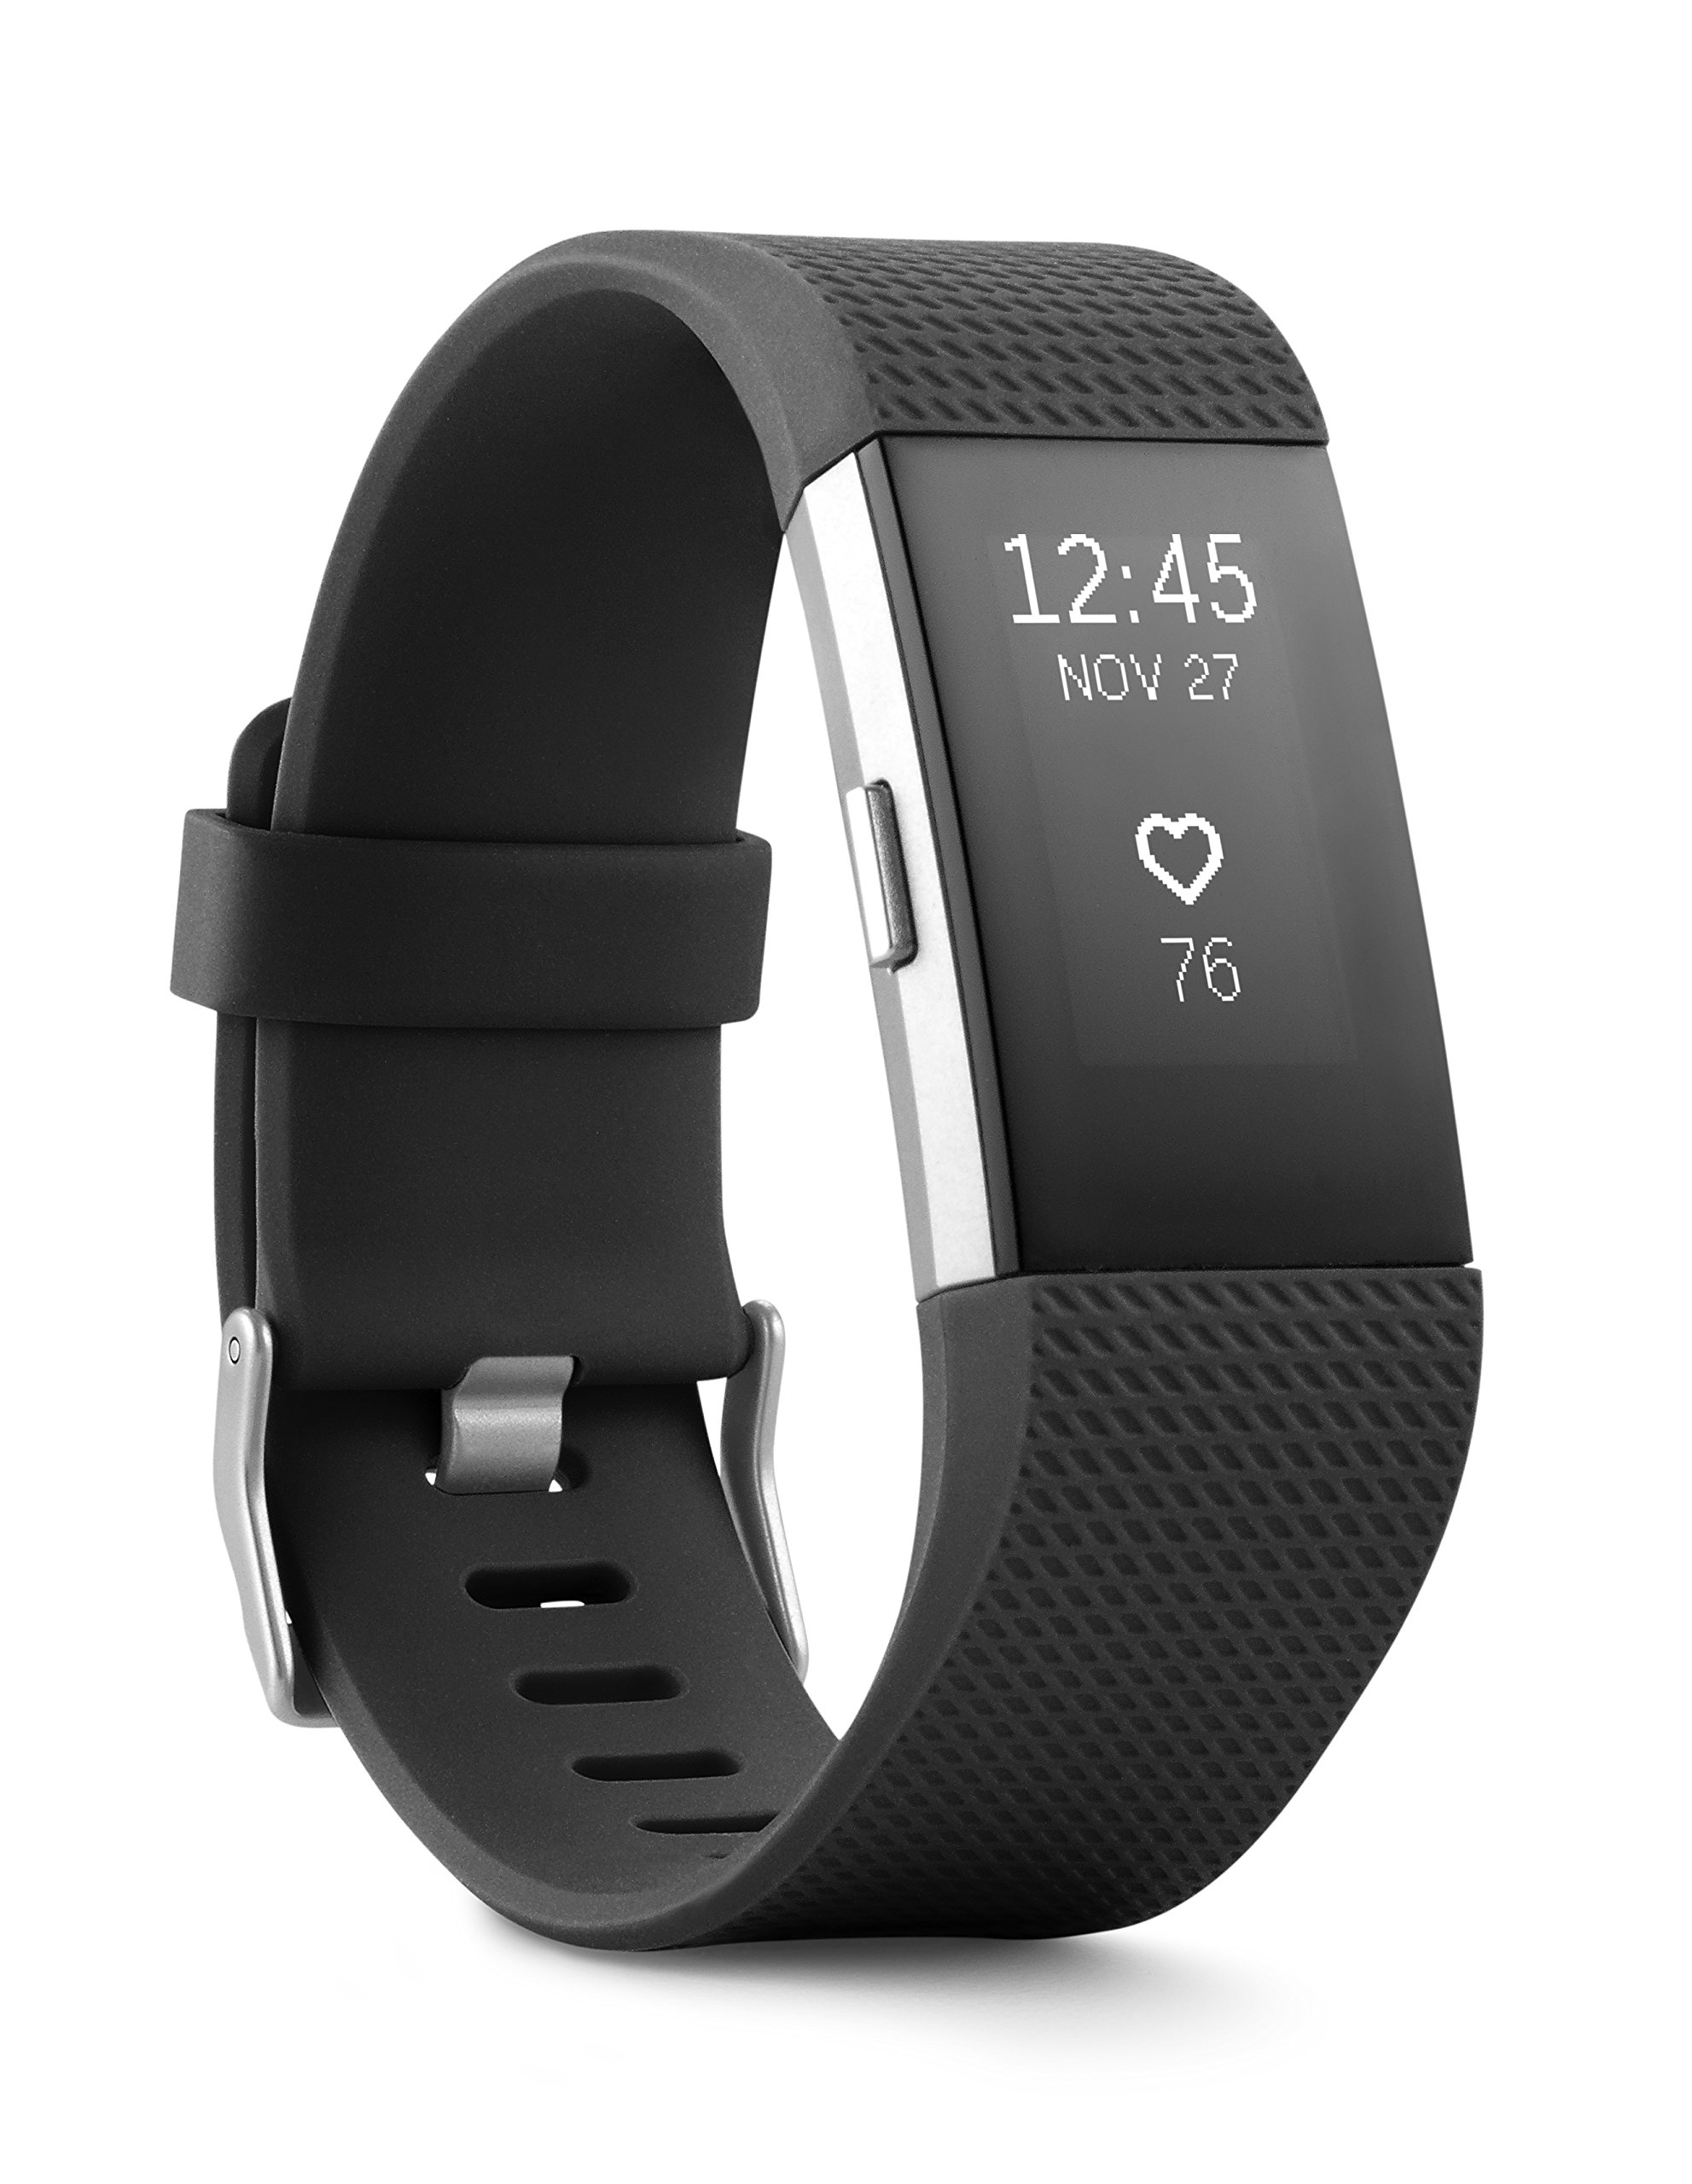 Fitbit Charge 2 - Black/Silver - **New Retail**, FB407SBKS (**New Retail**)